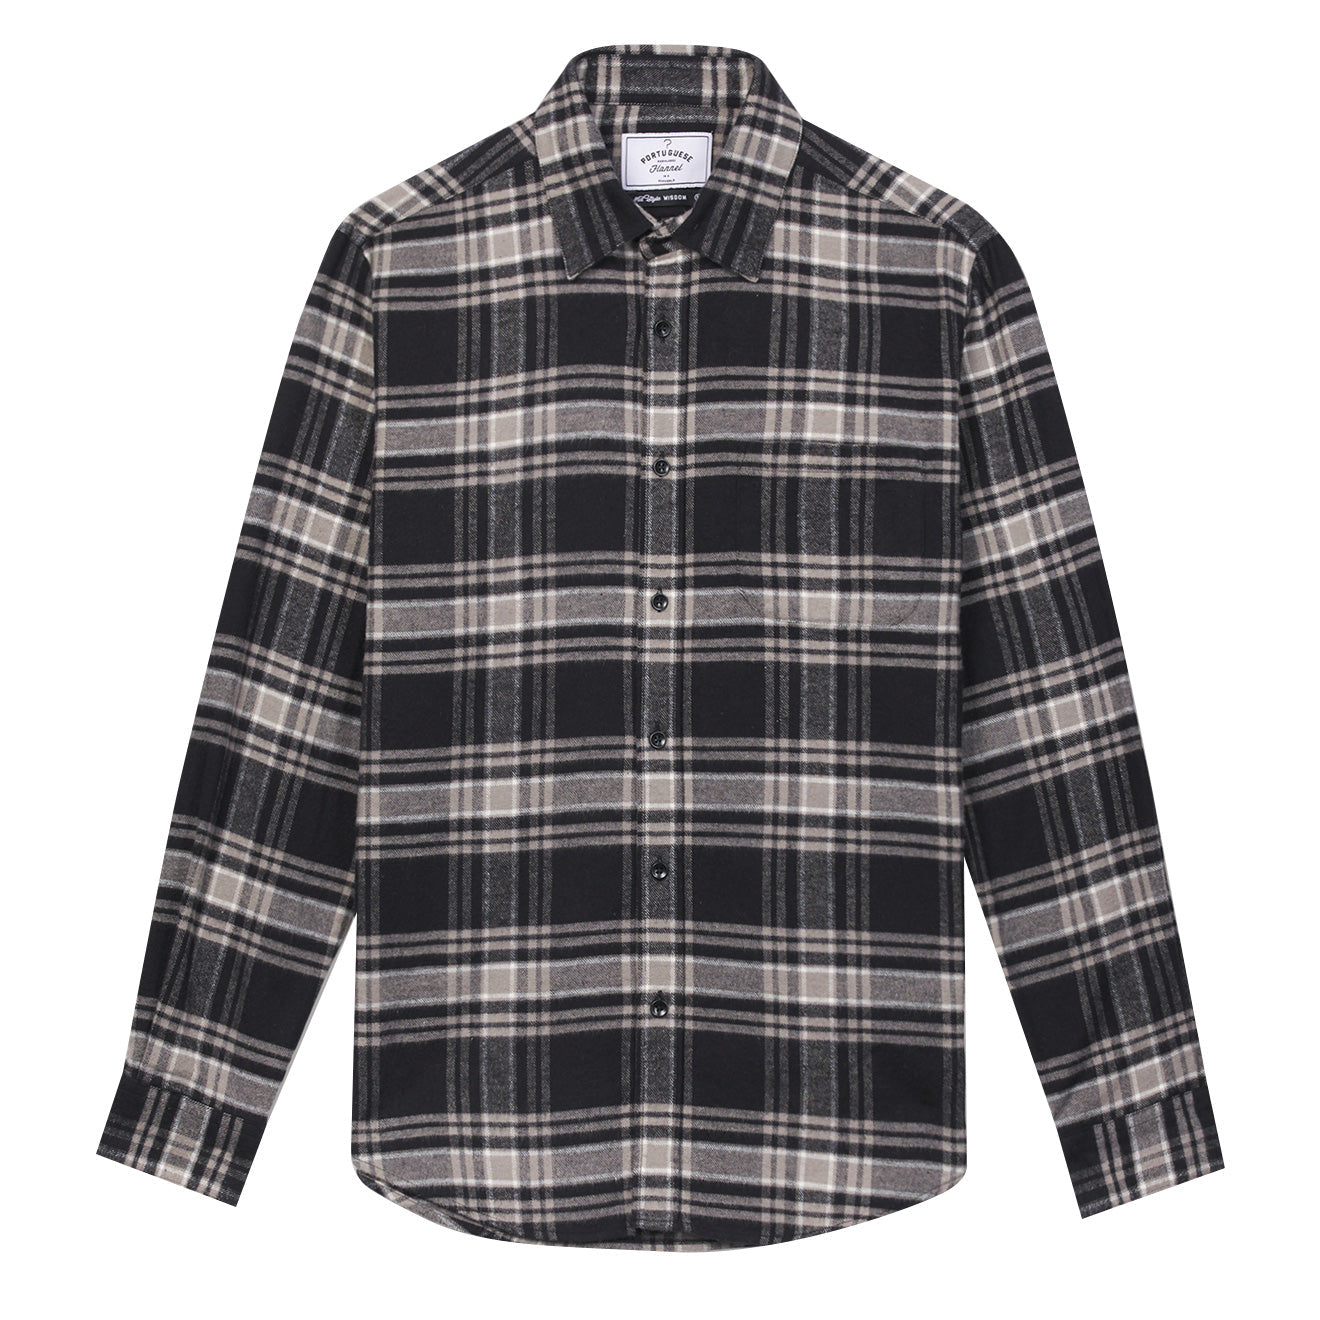 Portuguese Flannel BB Check Shirt Navy / Grey | The Sporting Lodge